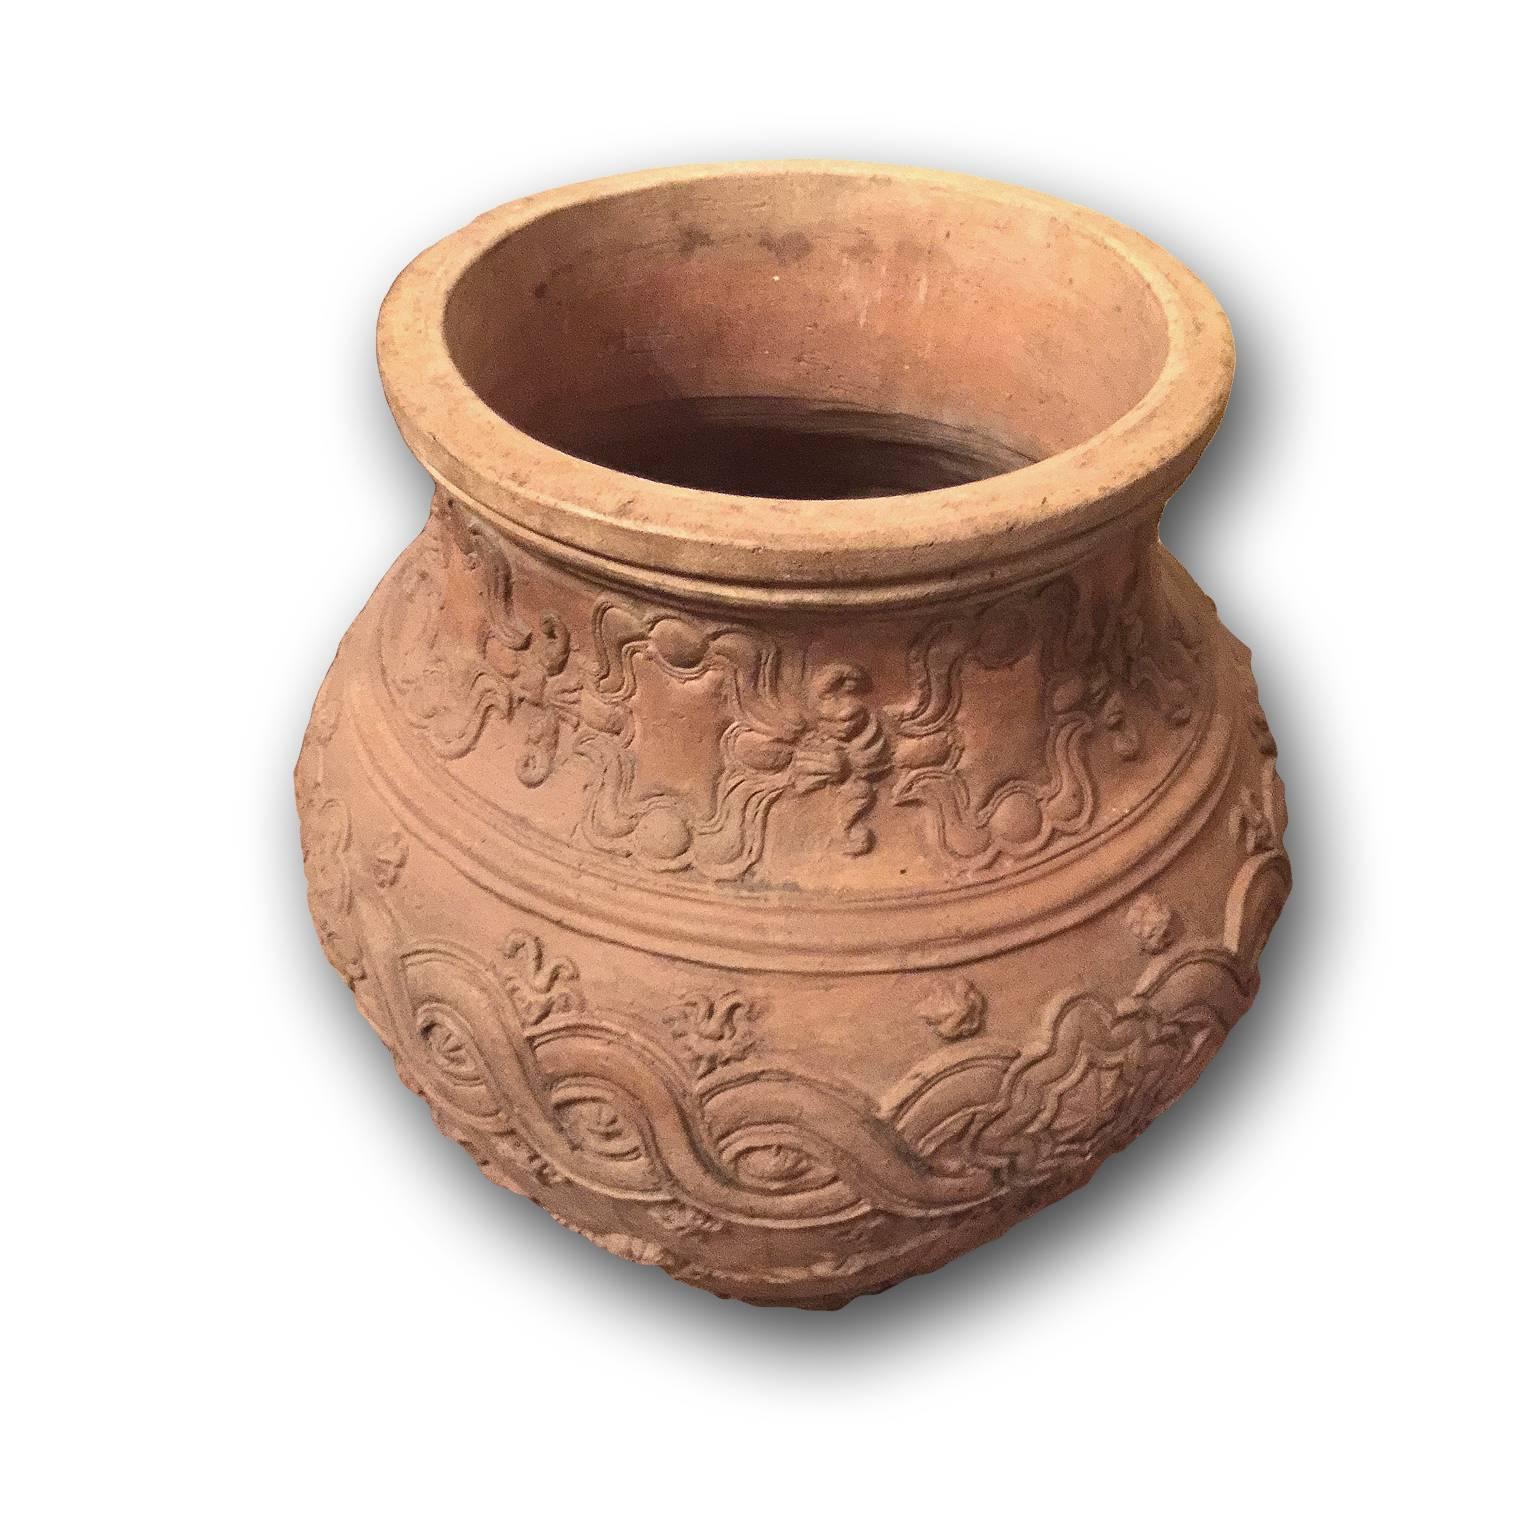 Large terracotta handcrafted jar before cooking.
Usually these objects are made to contain olive oil but this object has also been requested as a piece of furniture seen as embellished with floral and geometric carvings.
The color of the